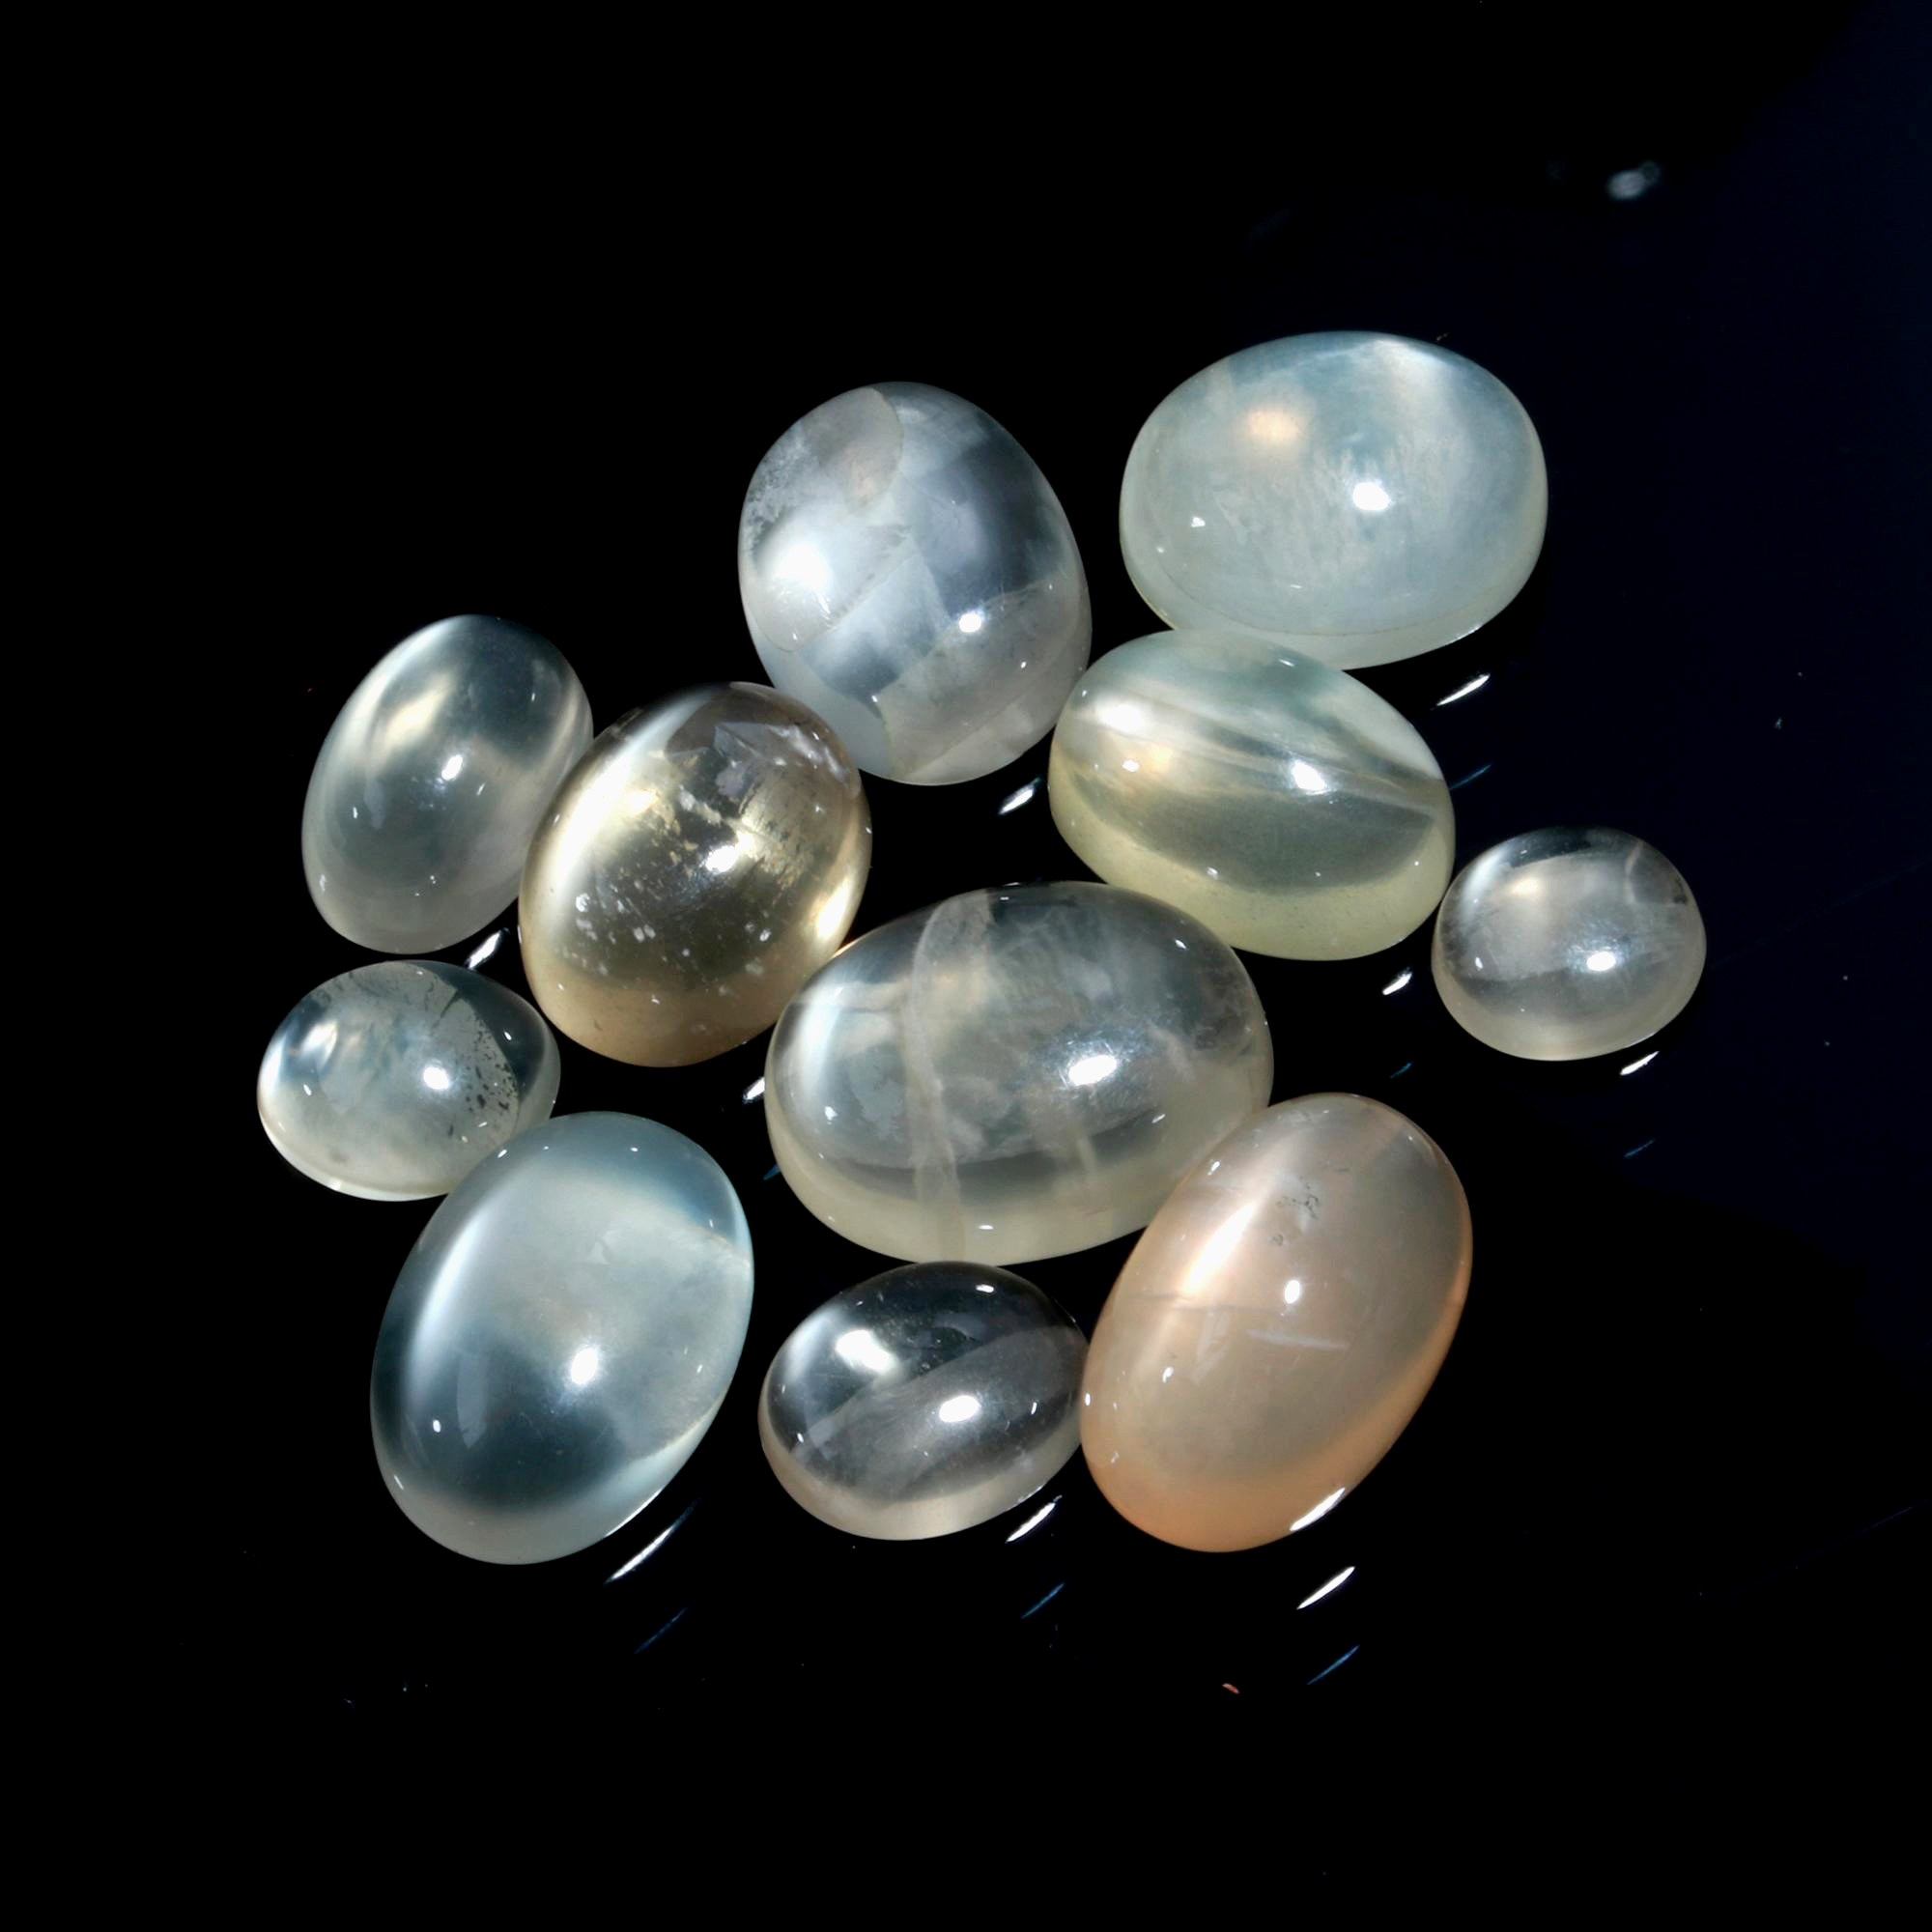 11 Pcs. 50Cts. Natural White Rainbow Moonstone polished Mix Cabochon Wholesale Loose Lot Size 15x9 9x7mm Gemstone for jewelry